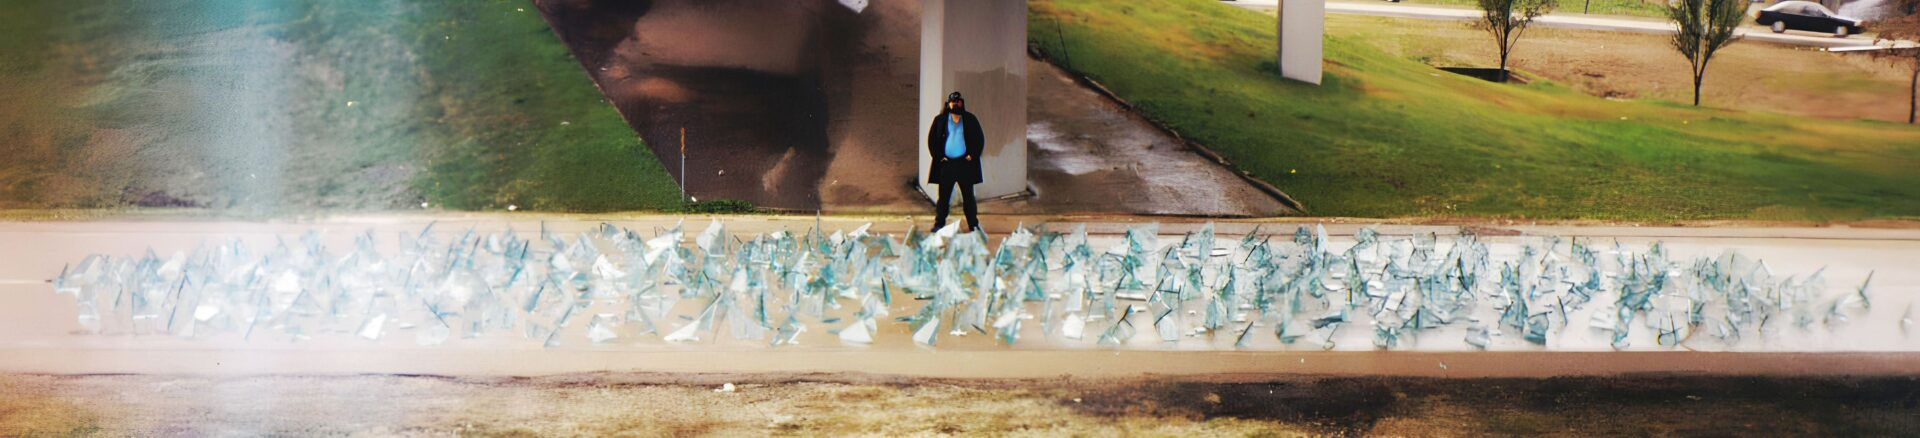 A person standing in front of some paper birds